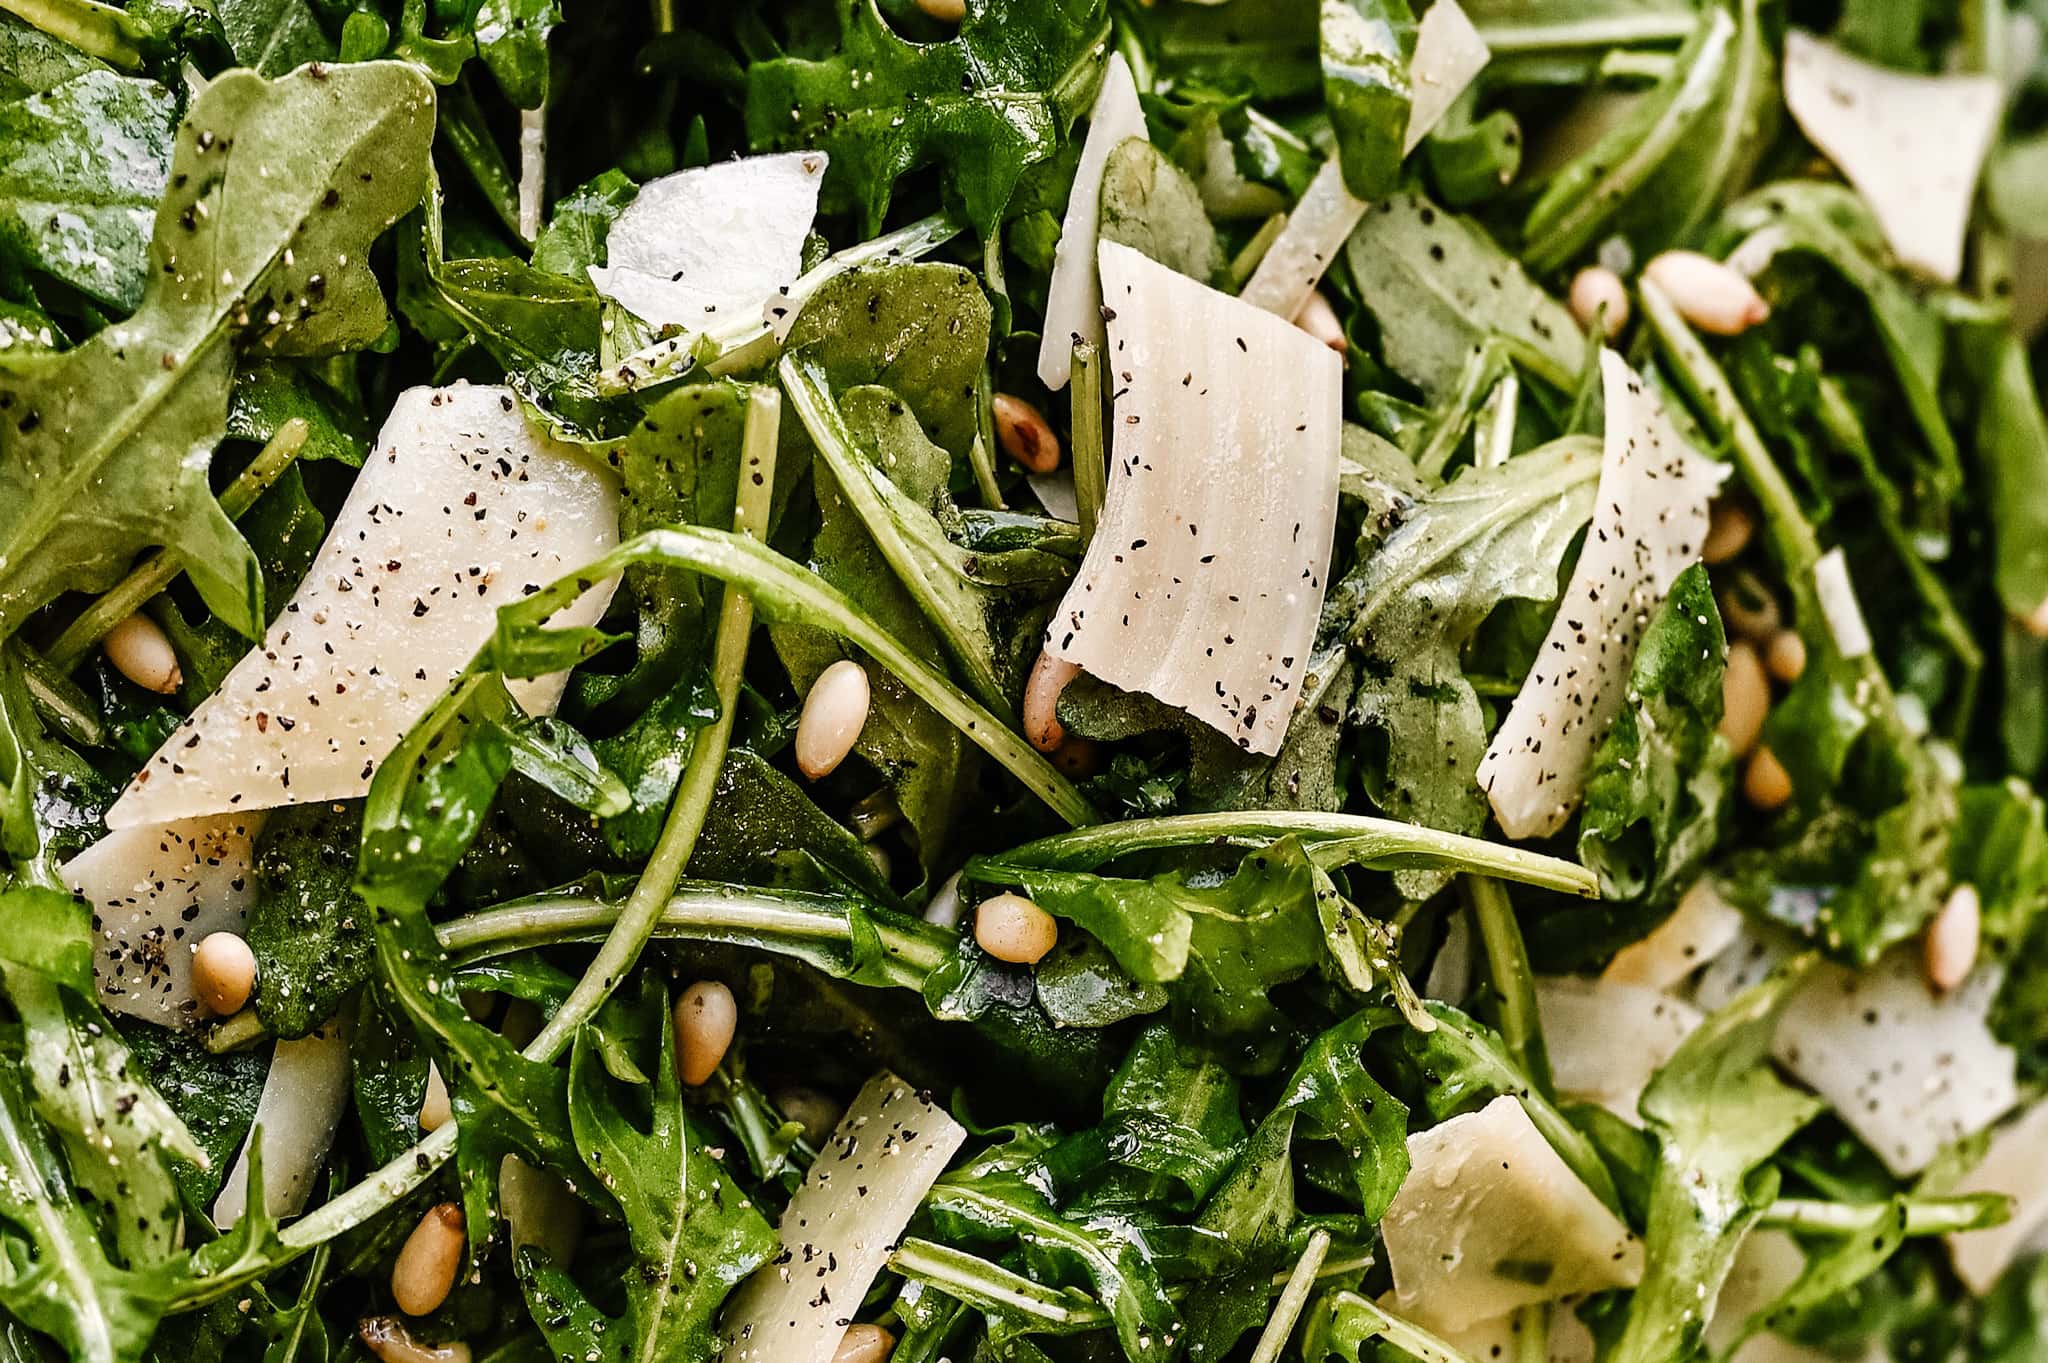 close up texture shot of the salad. Pepper, shave parmesan and pine nuts can be seen throughout the salad